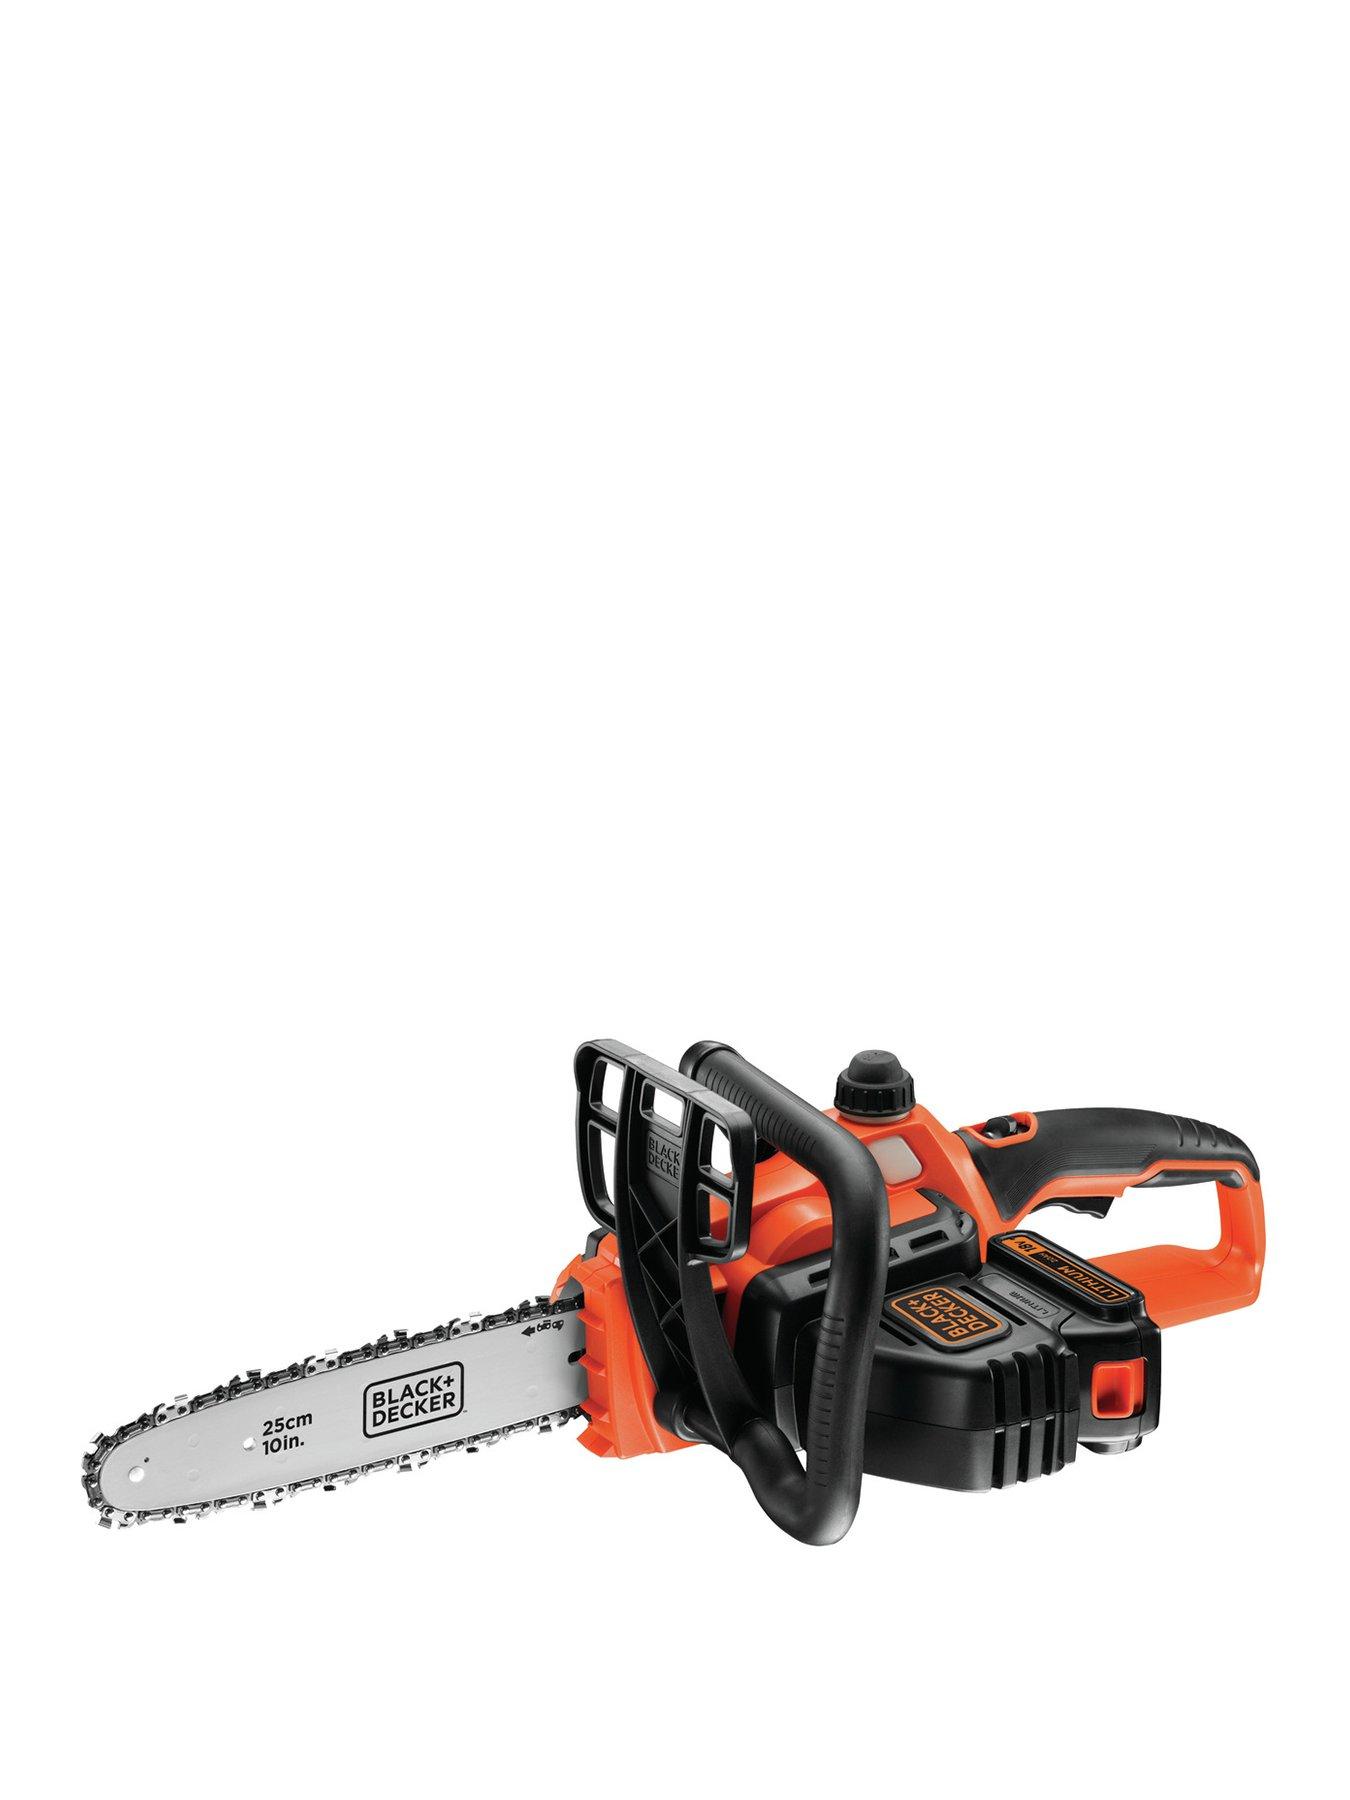 Black and Decker PS7525 Corded Pole Chain Saw 2.7m Height 25cm Bar 800w  Garden